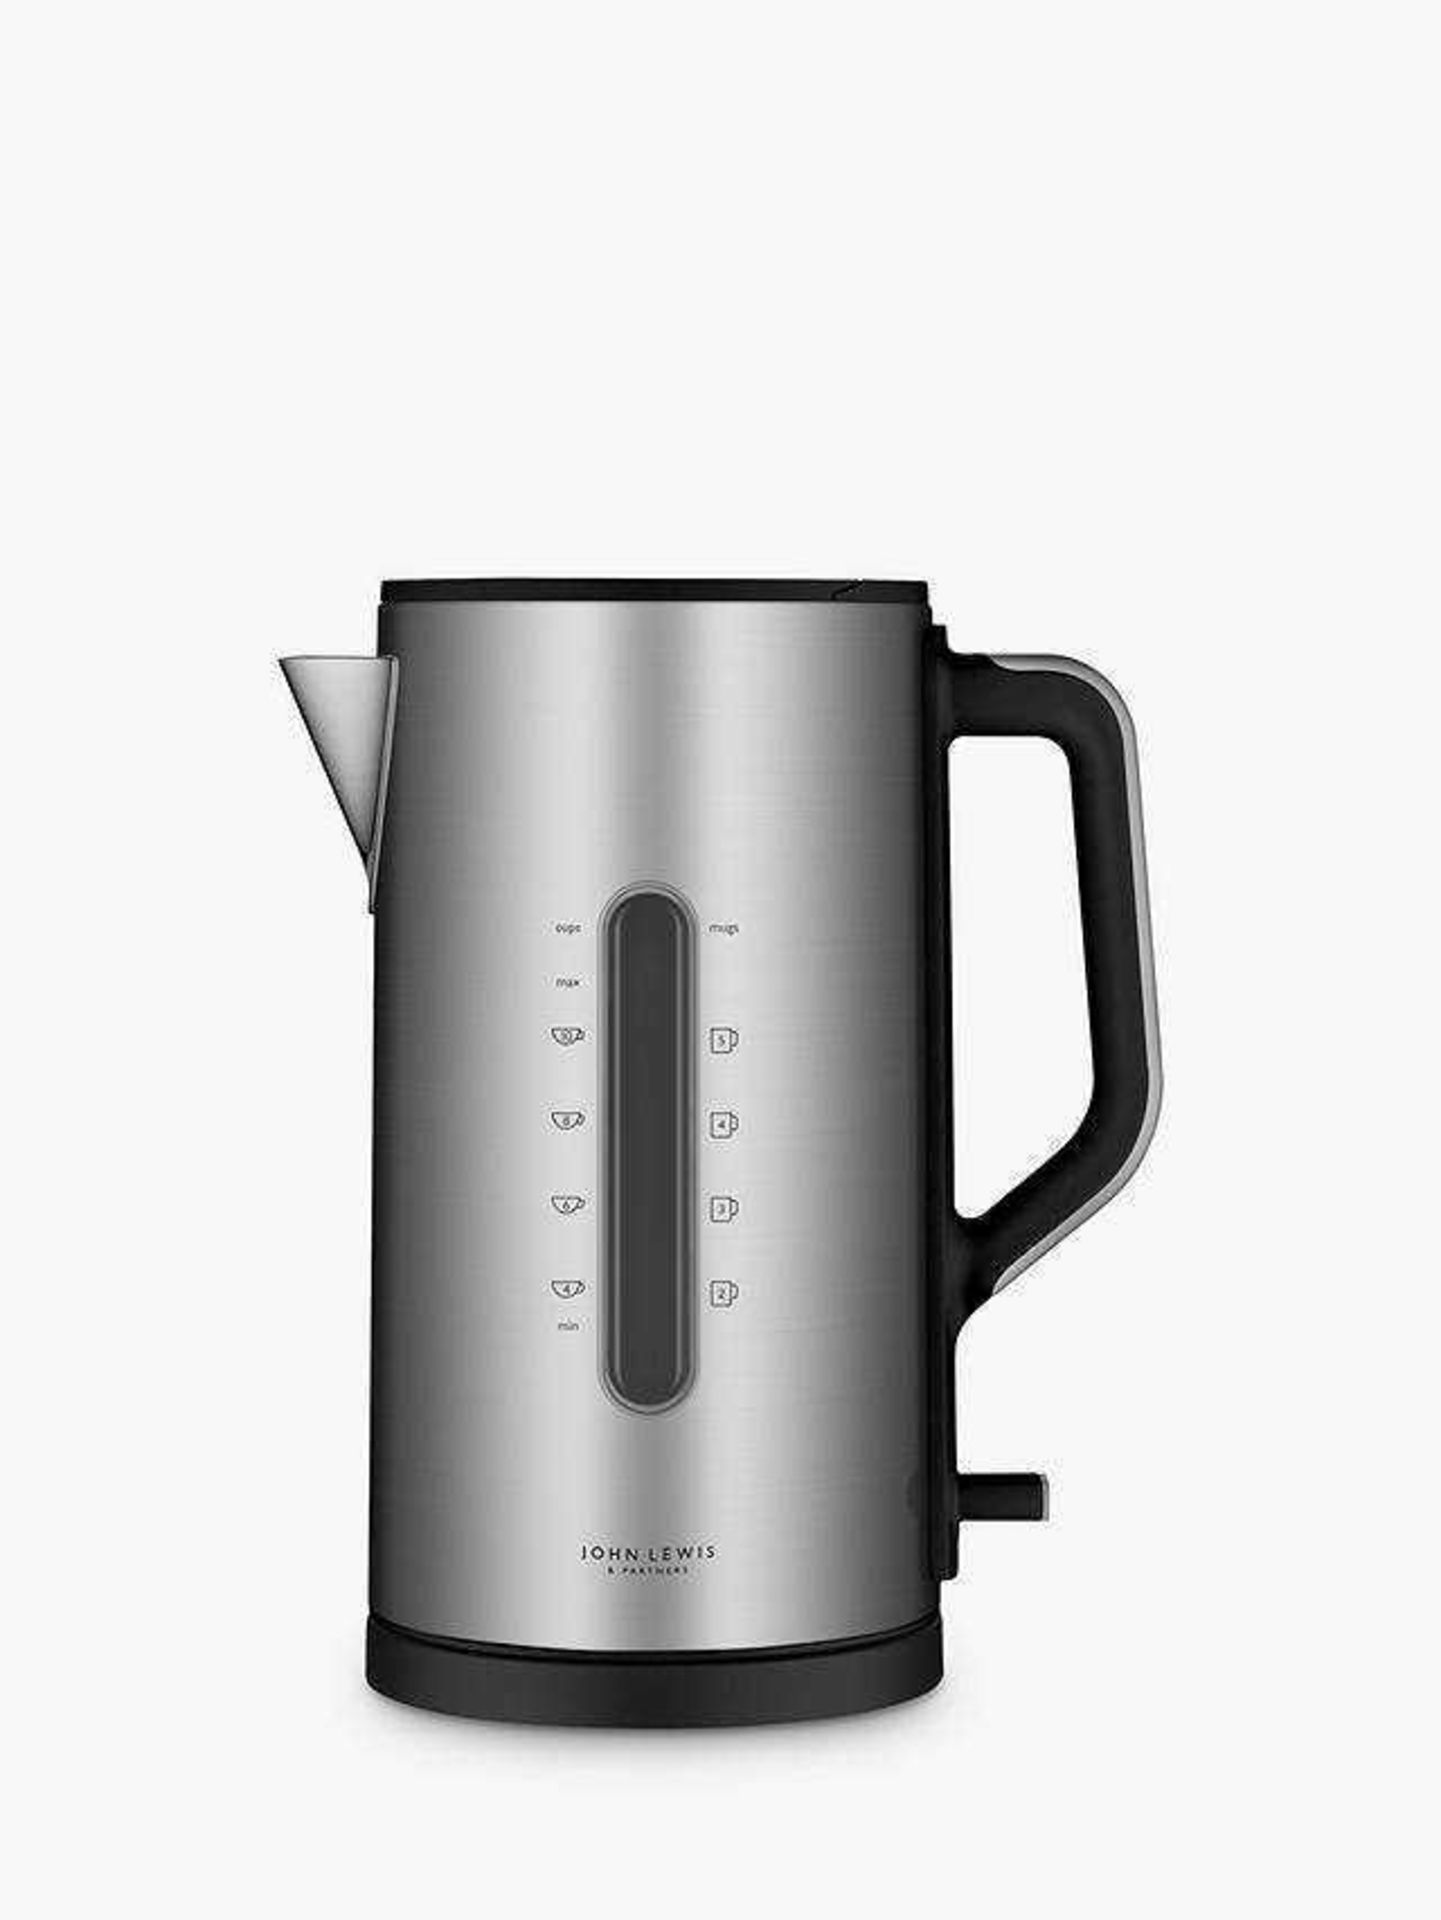 Combined RRP £135 Lot To Contain 3 Boxed John Lewis 1.7 Litre Kettles Coated Stainless Steel